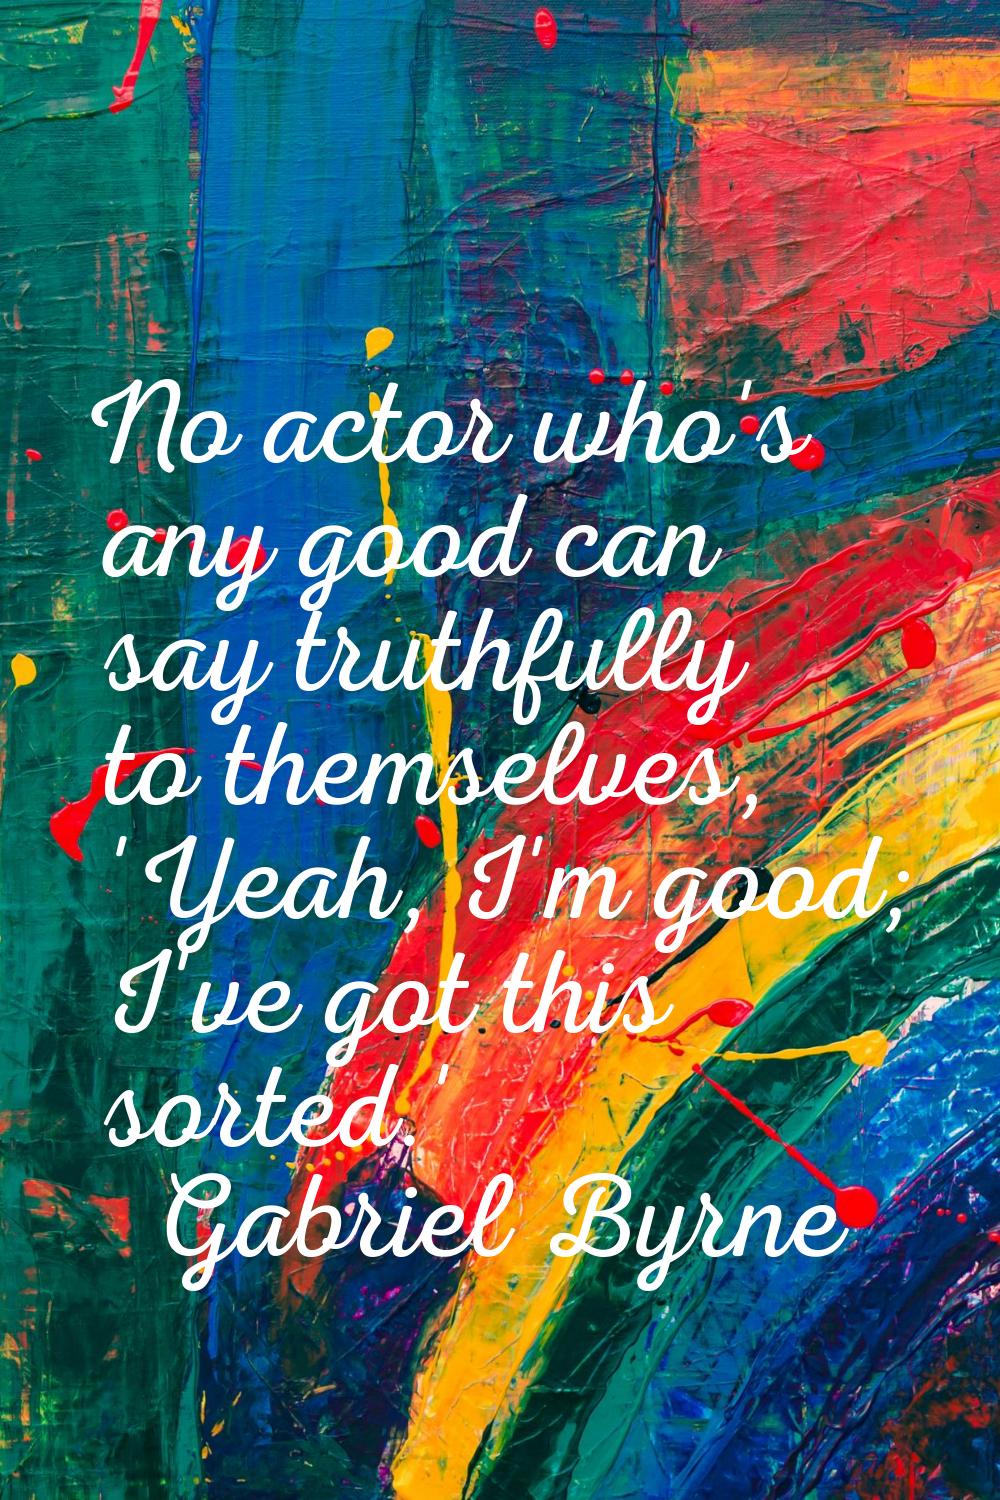 No actor who's any good can say truthfully to themselves, 'Yeah, I'm good; I've got this sorted.'